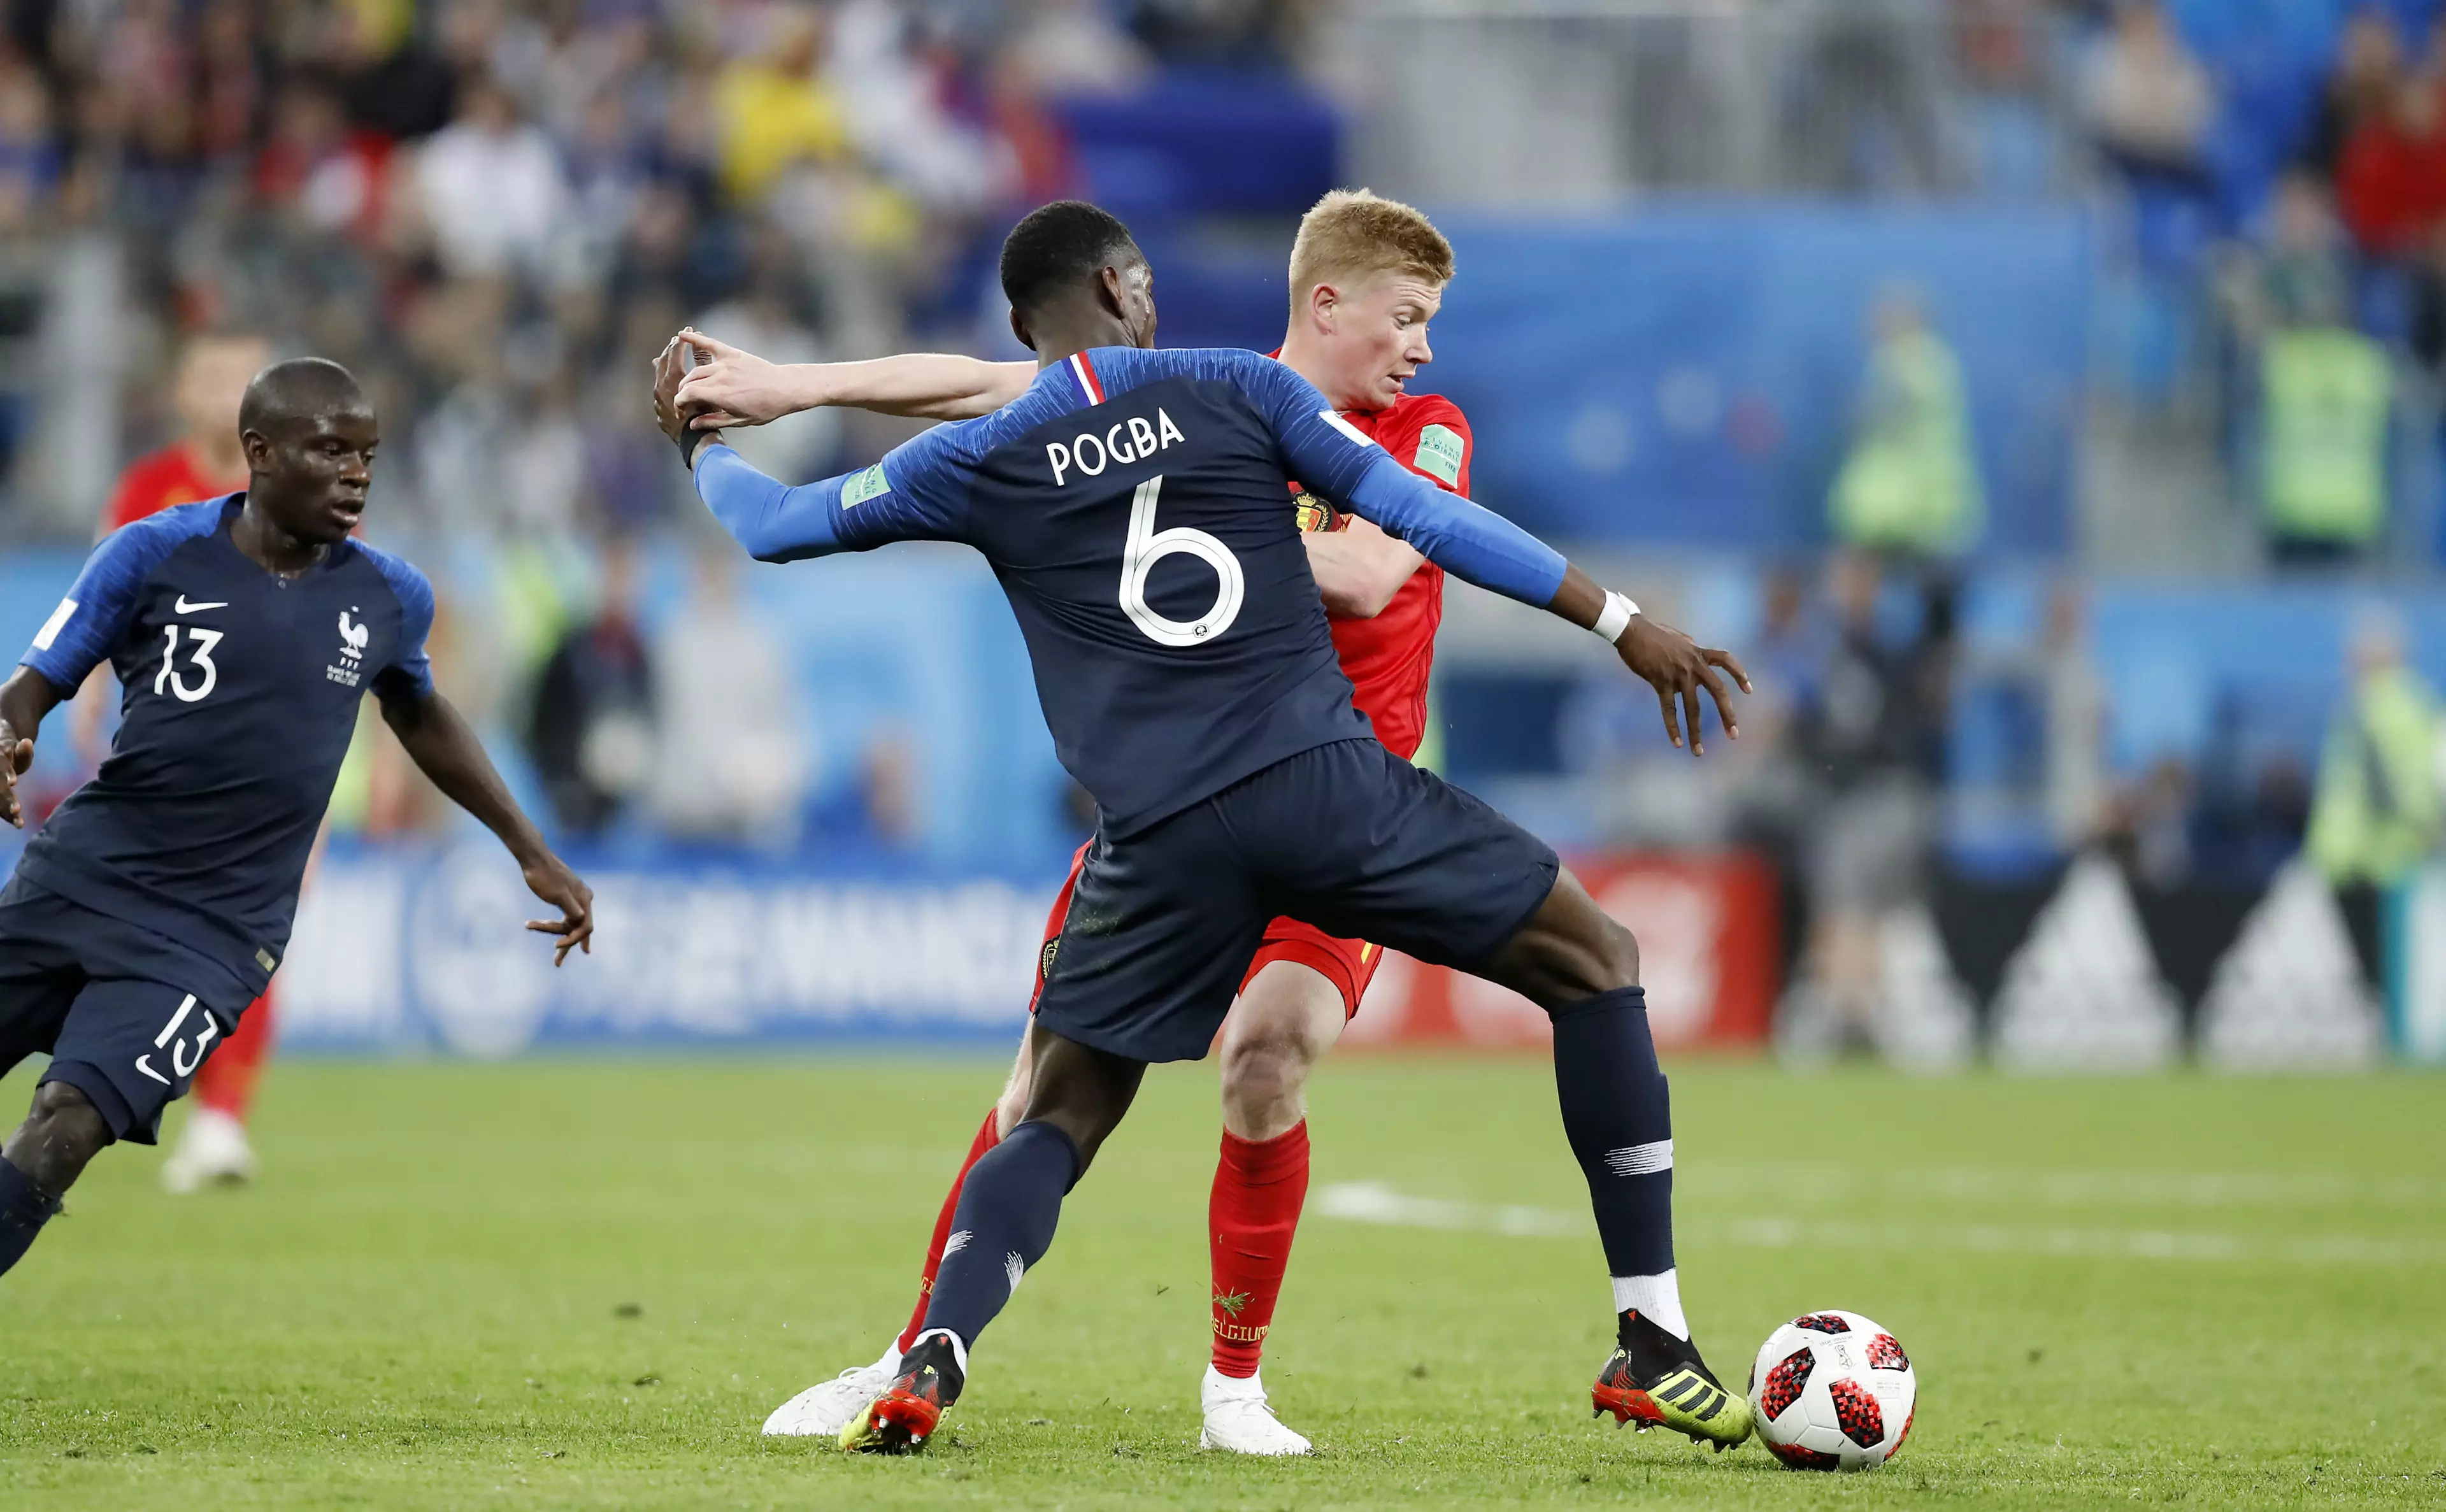 Pogba battling with De Bruyne for the ball. Image: PA